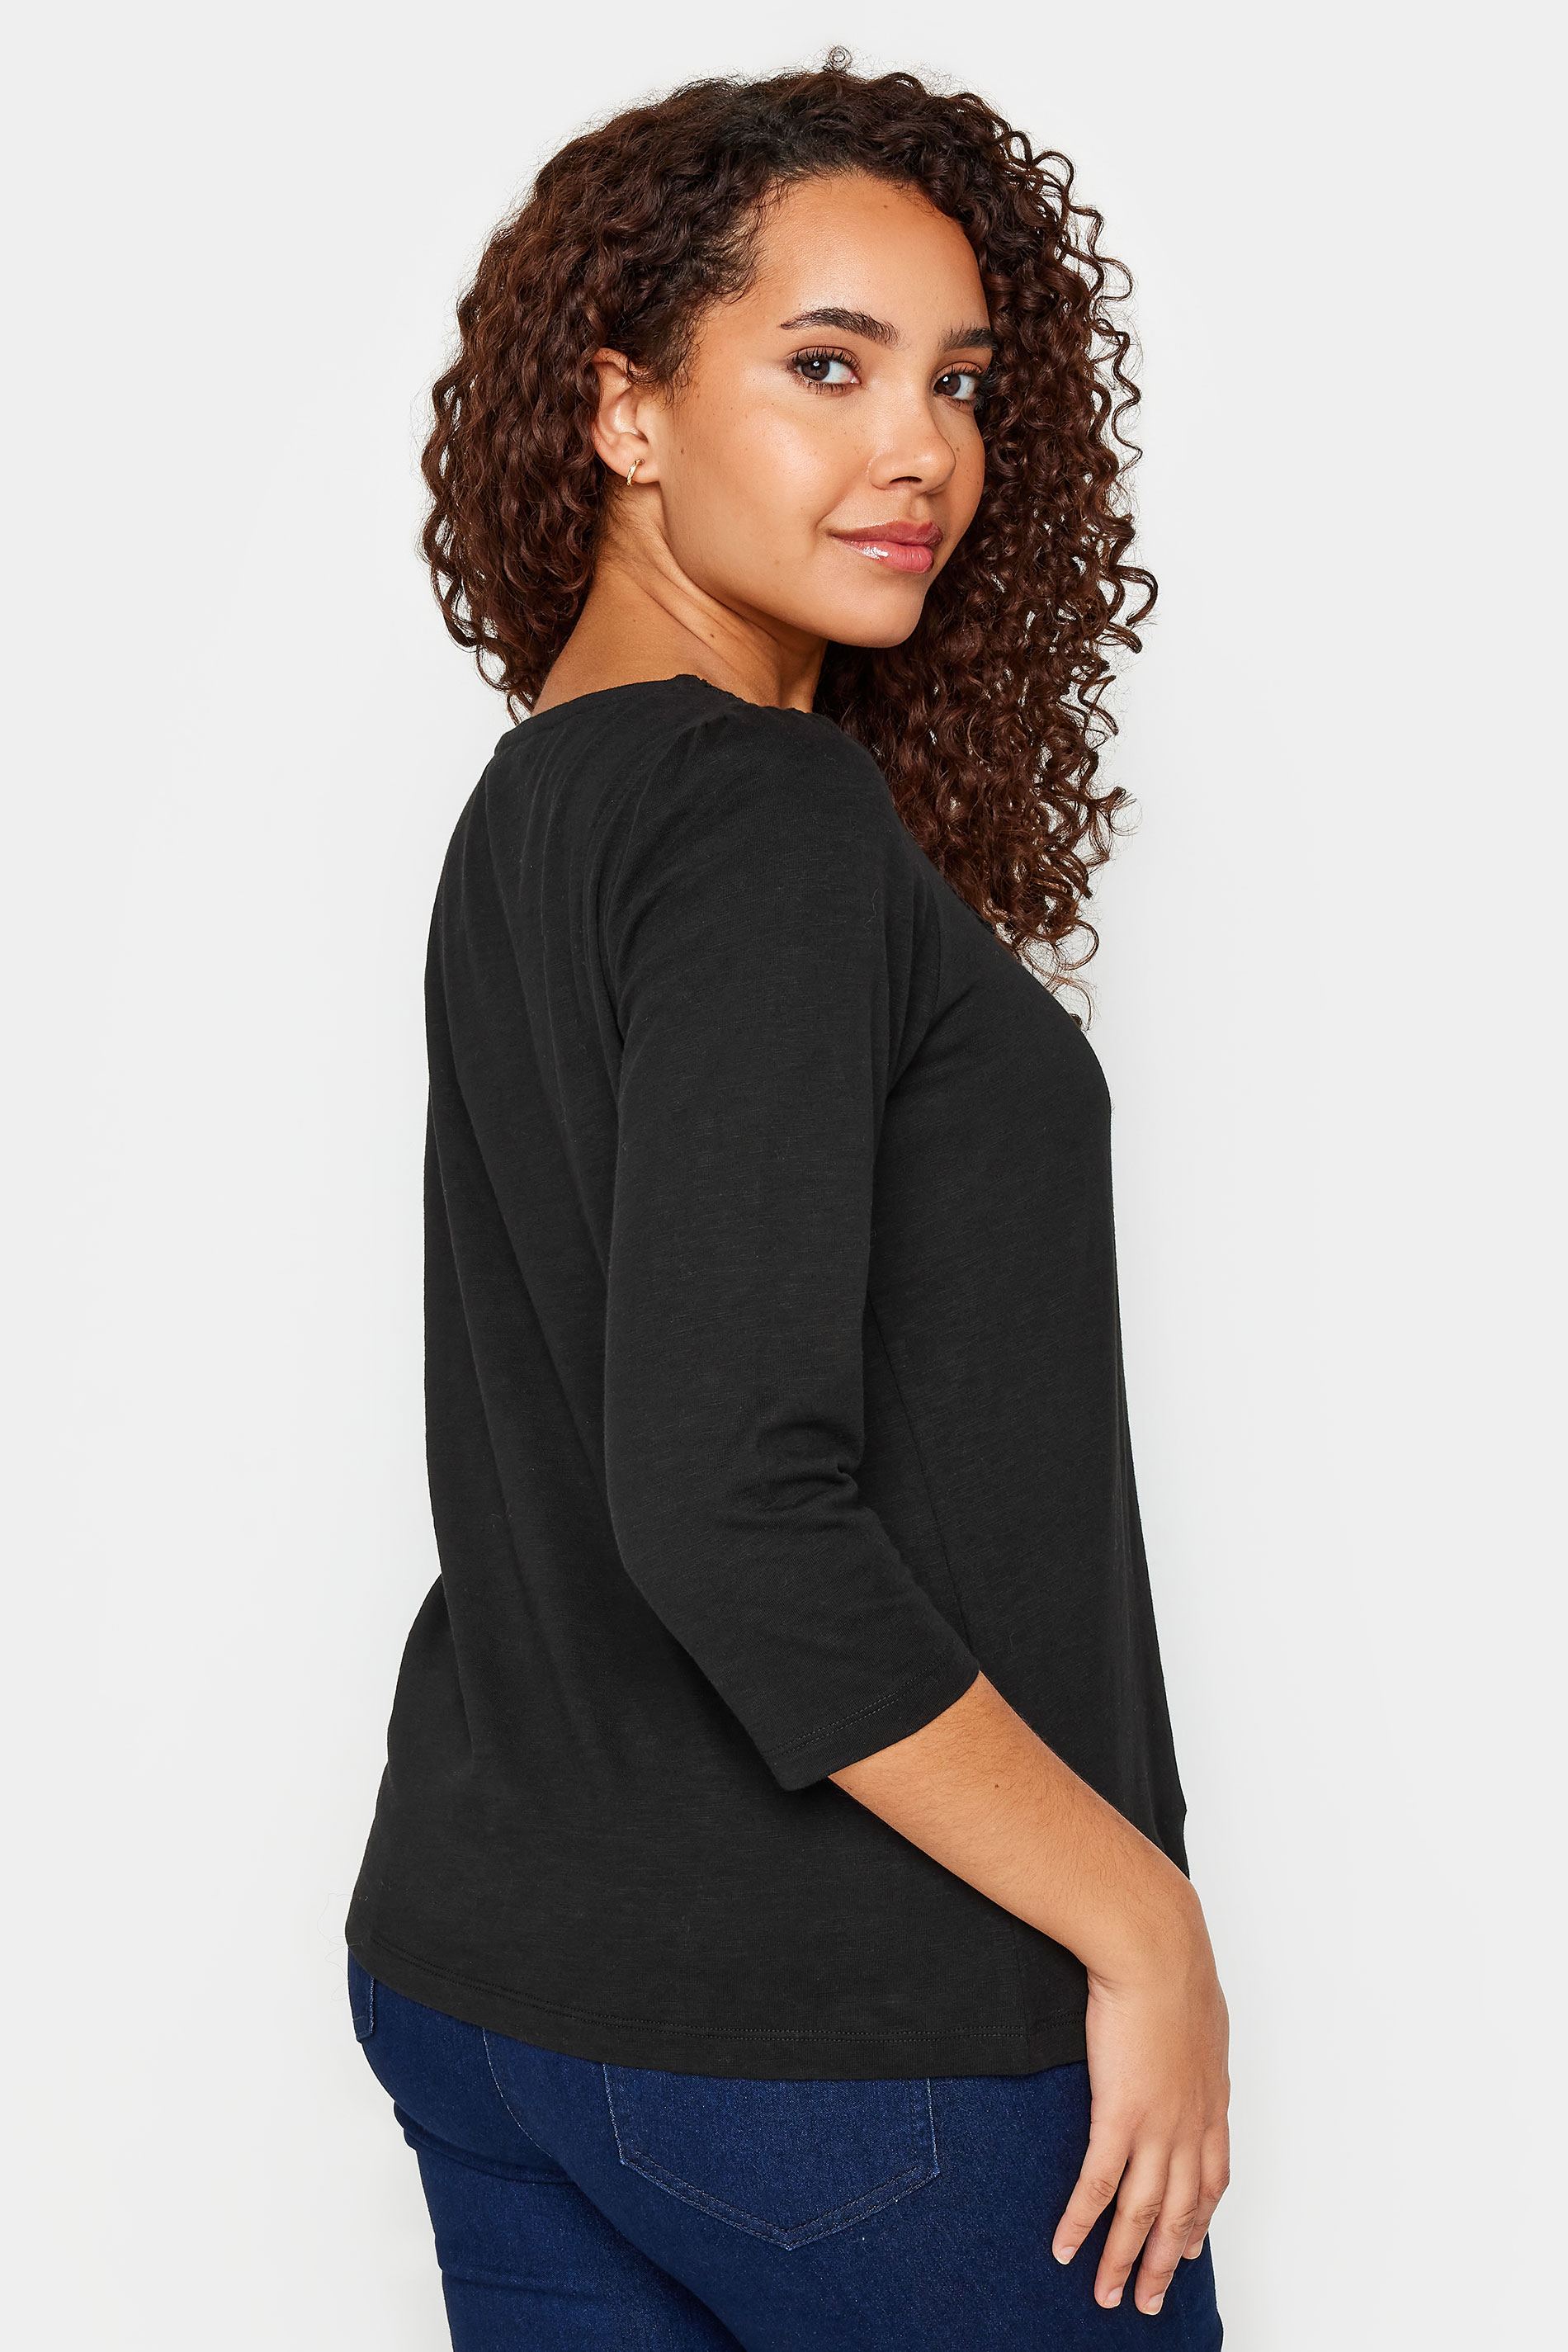 M&Co Black Square Neck 3/4 Sleeve Top | M&Co 3